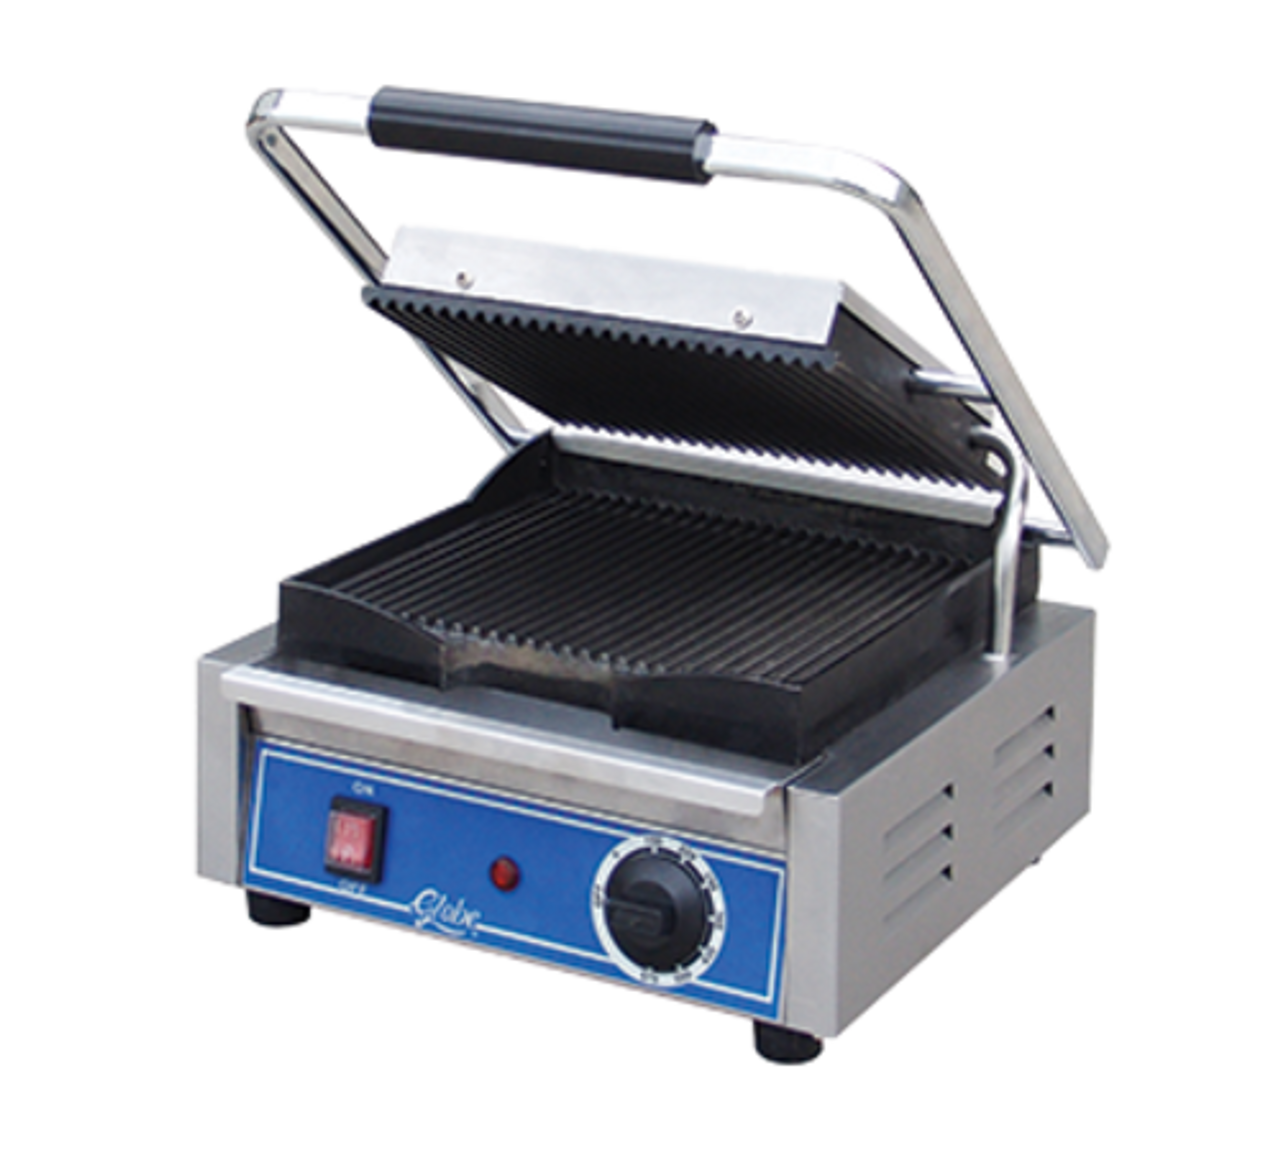 Bistro Panini Grill, single, countertop, electric, grooved, 10" x 10" GPG10